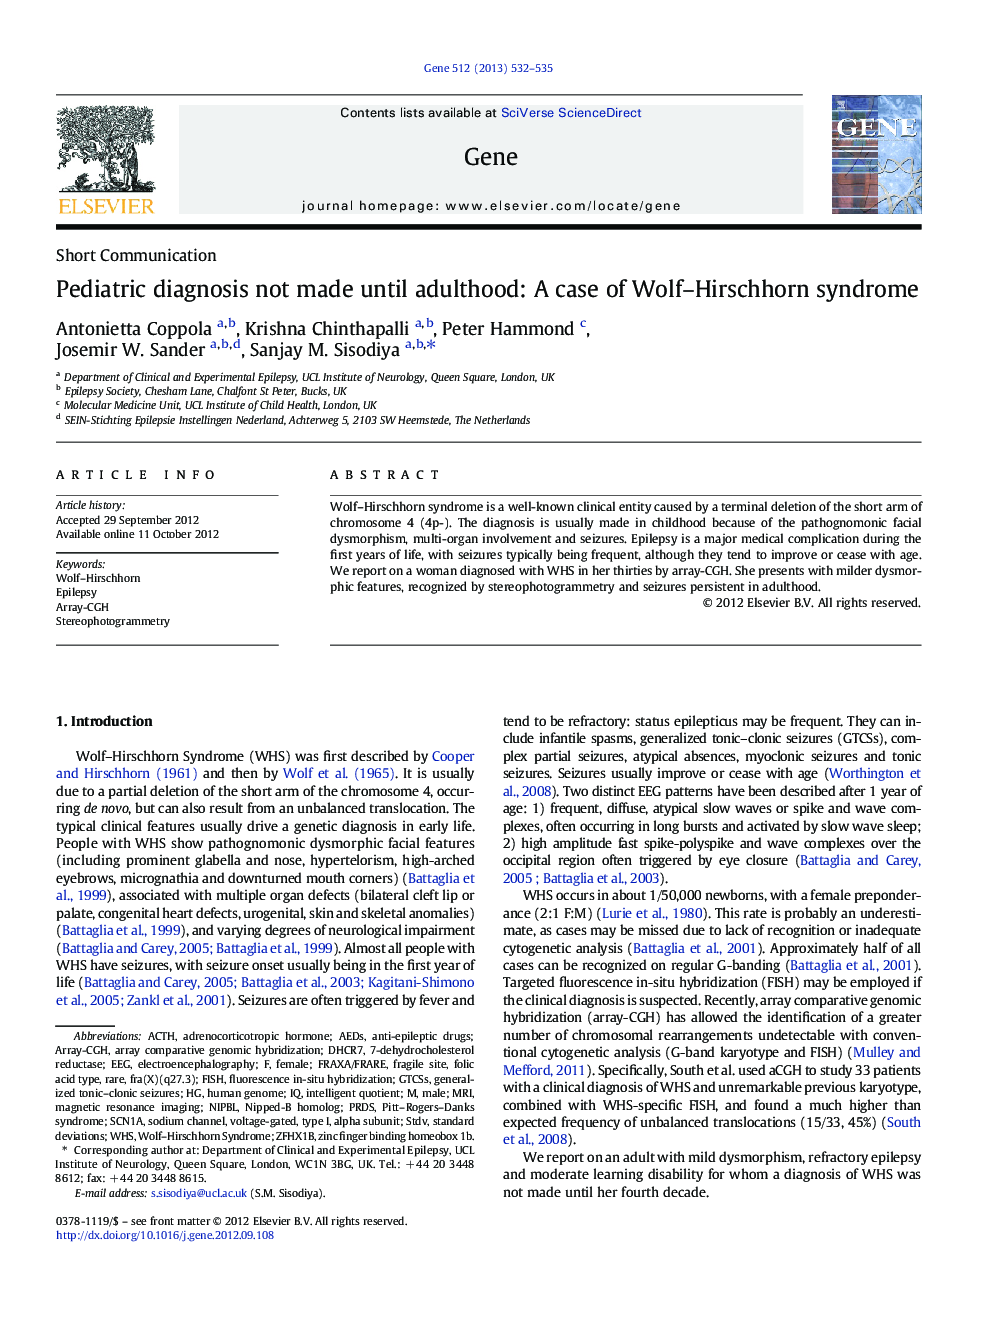 Pediatric diagnosis not made until adulthood: A case of Wolf–Hirschhorn syndrome